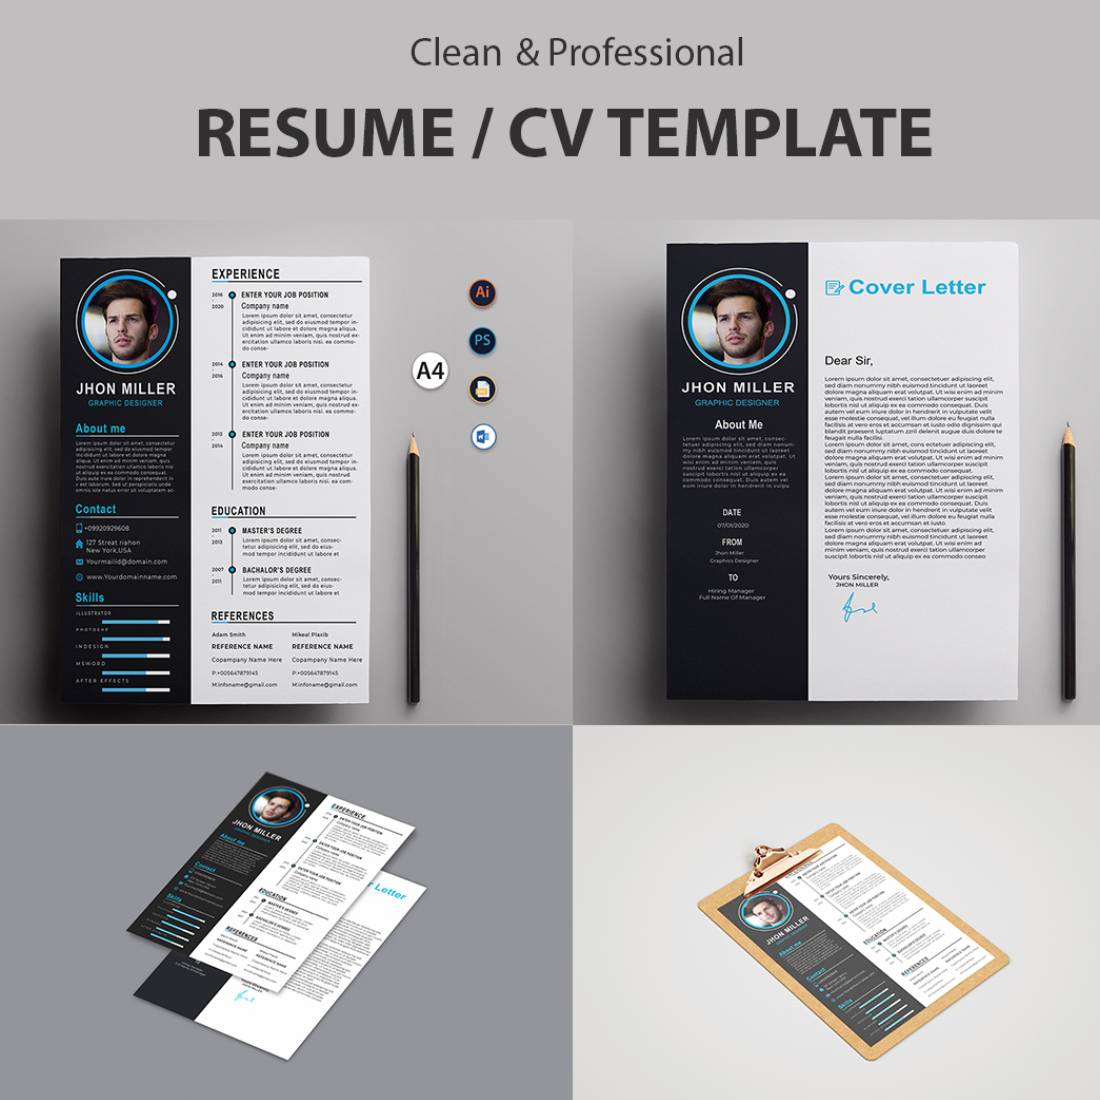 Clean and professional resume / cvt template.